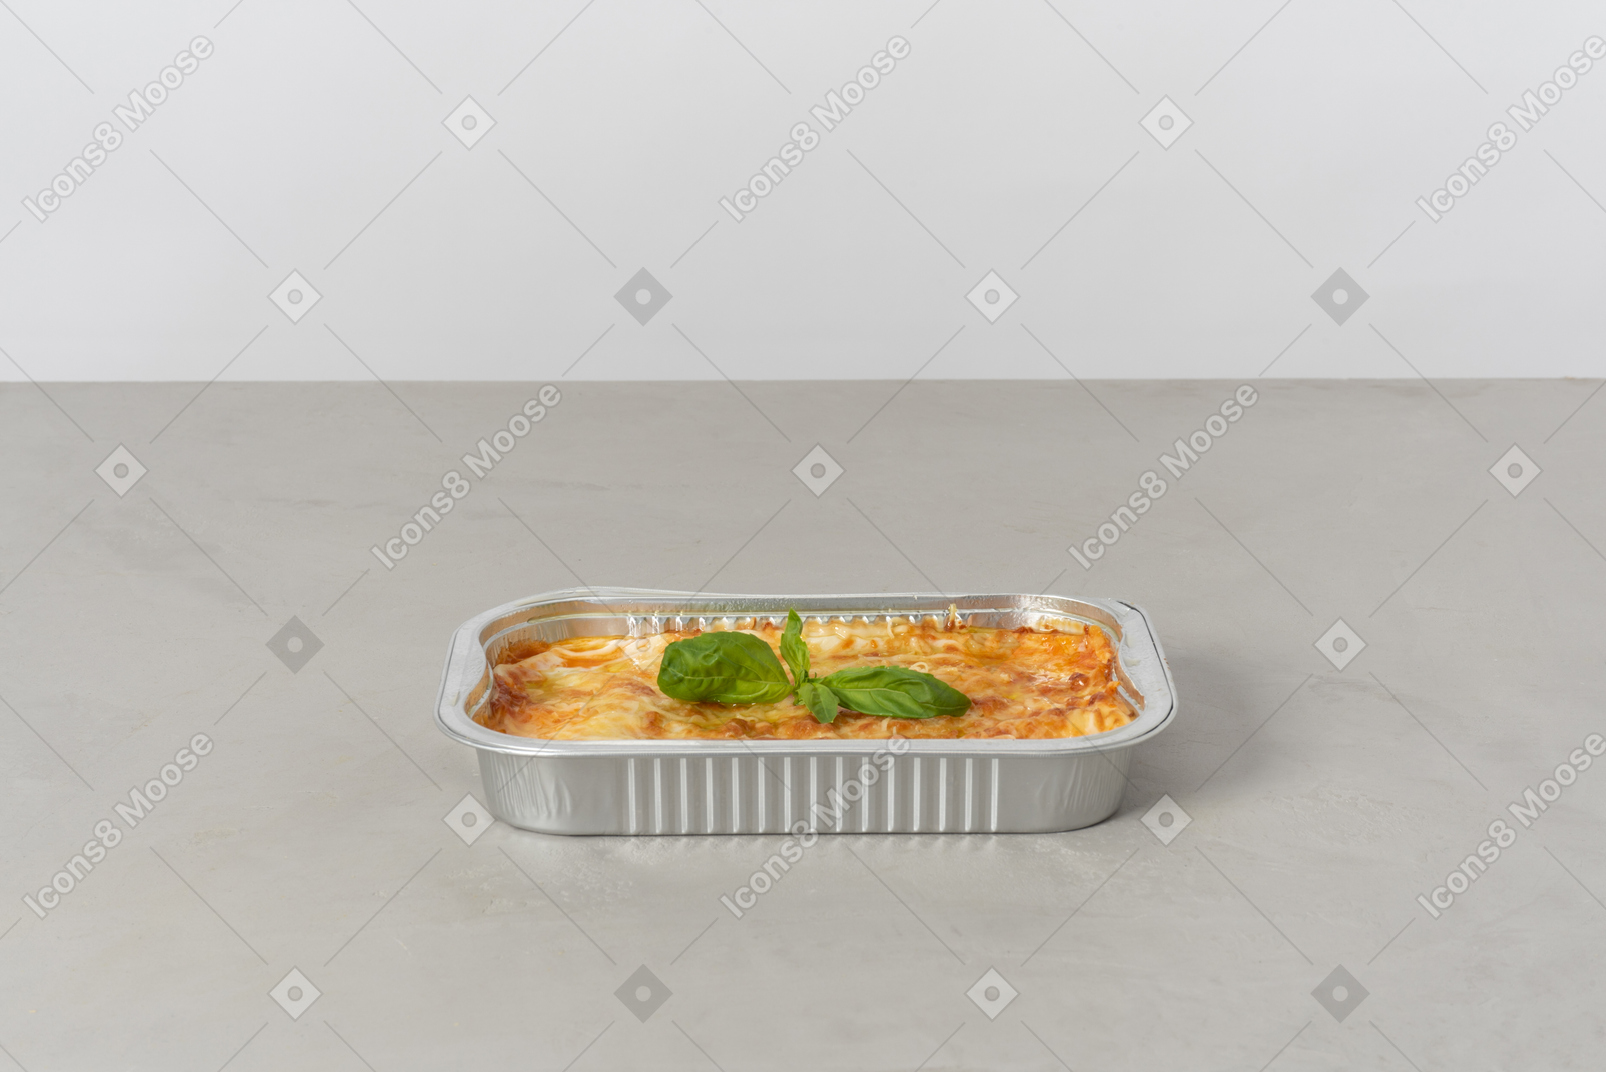 Lasagna is cooked and ready to be served